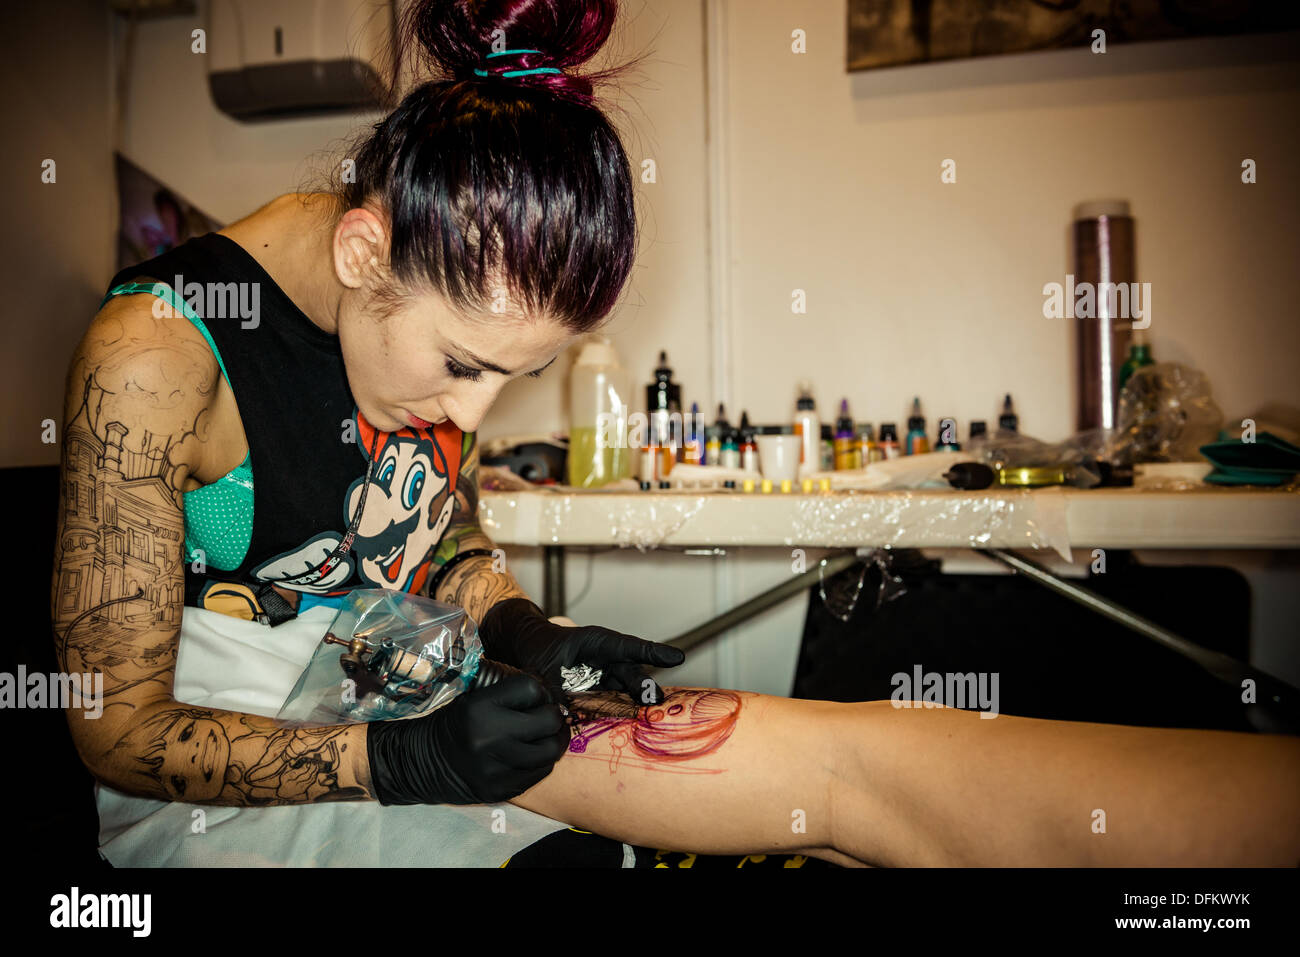 Professional Artist Doing Tattoo on Client Arm Editorial Stock Photo   Image of 17th event 51060988